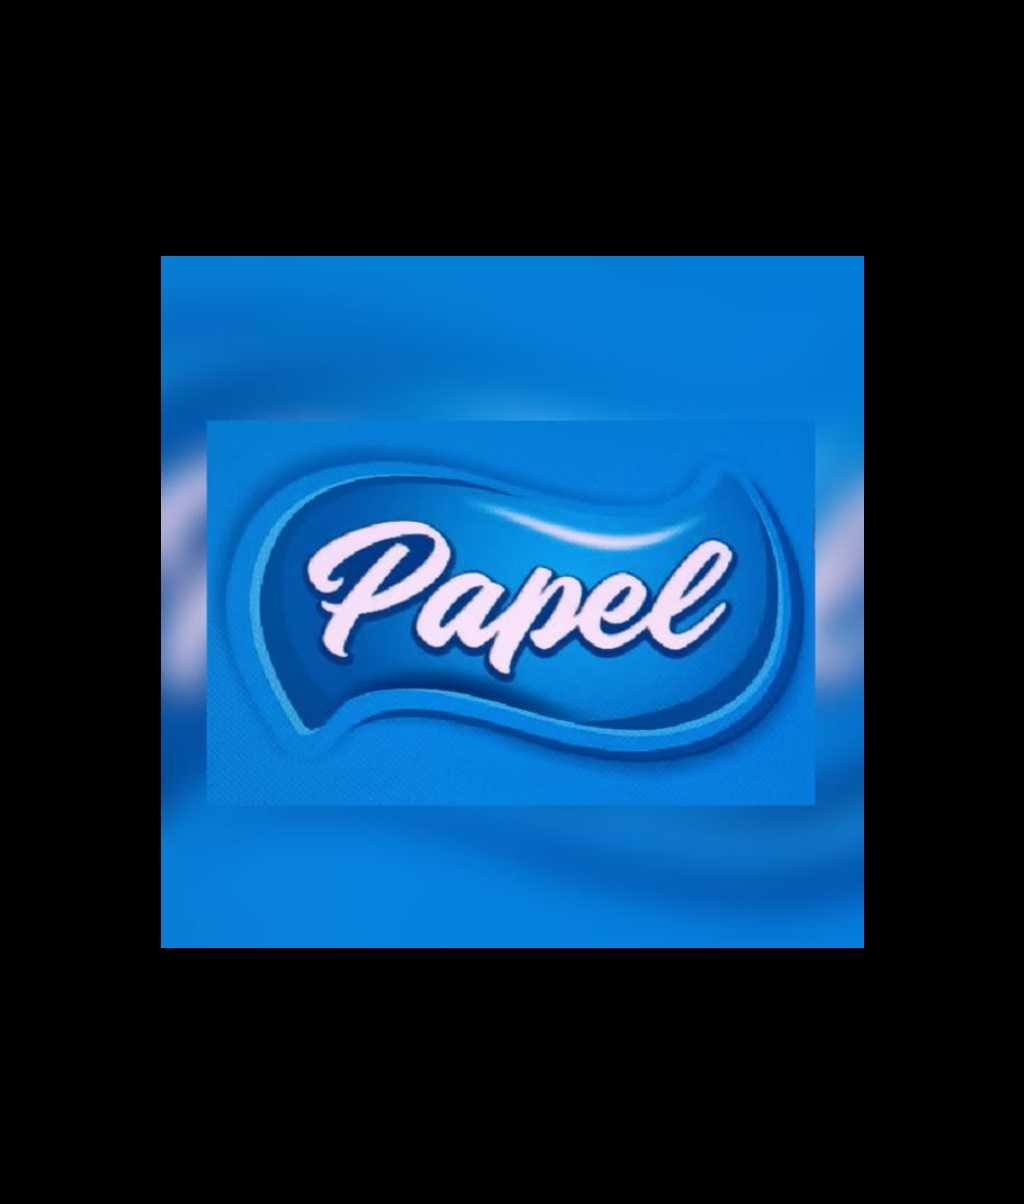 PAPEL INDUSTRY